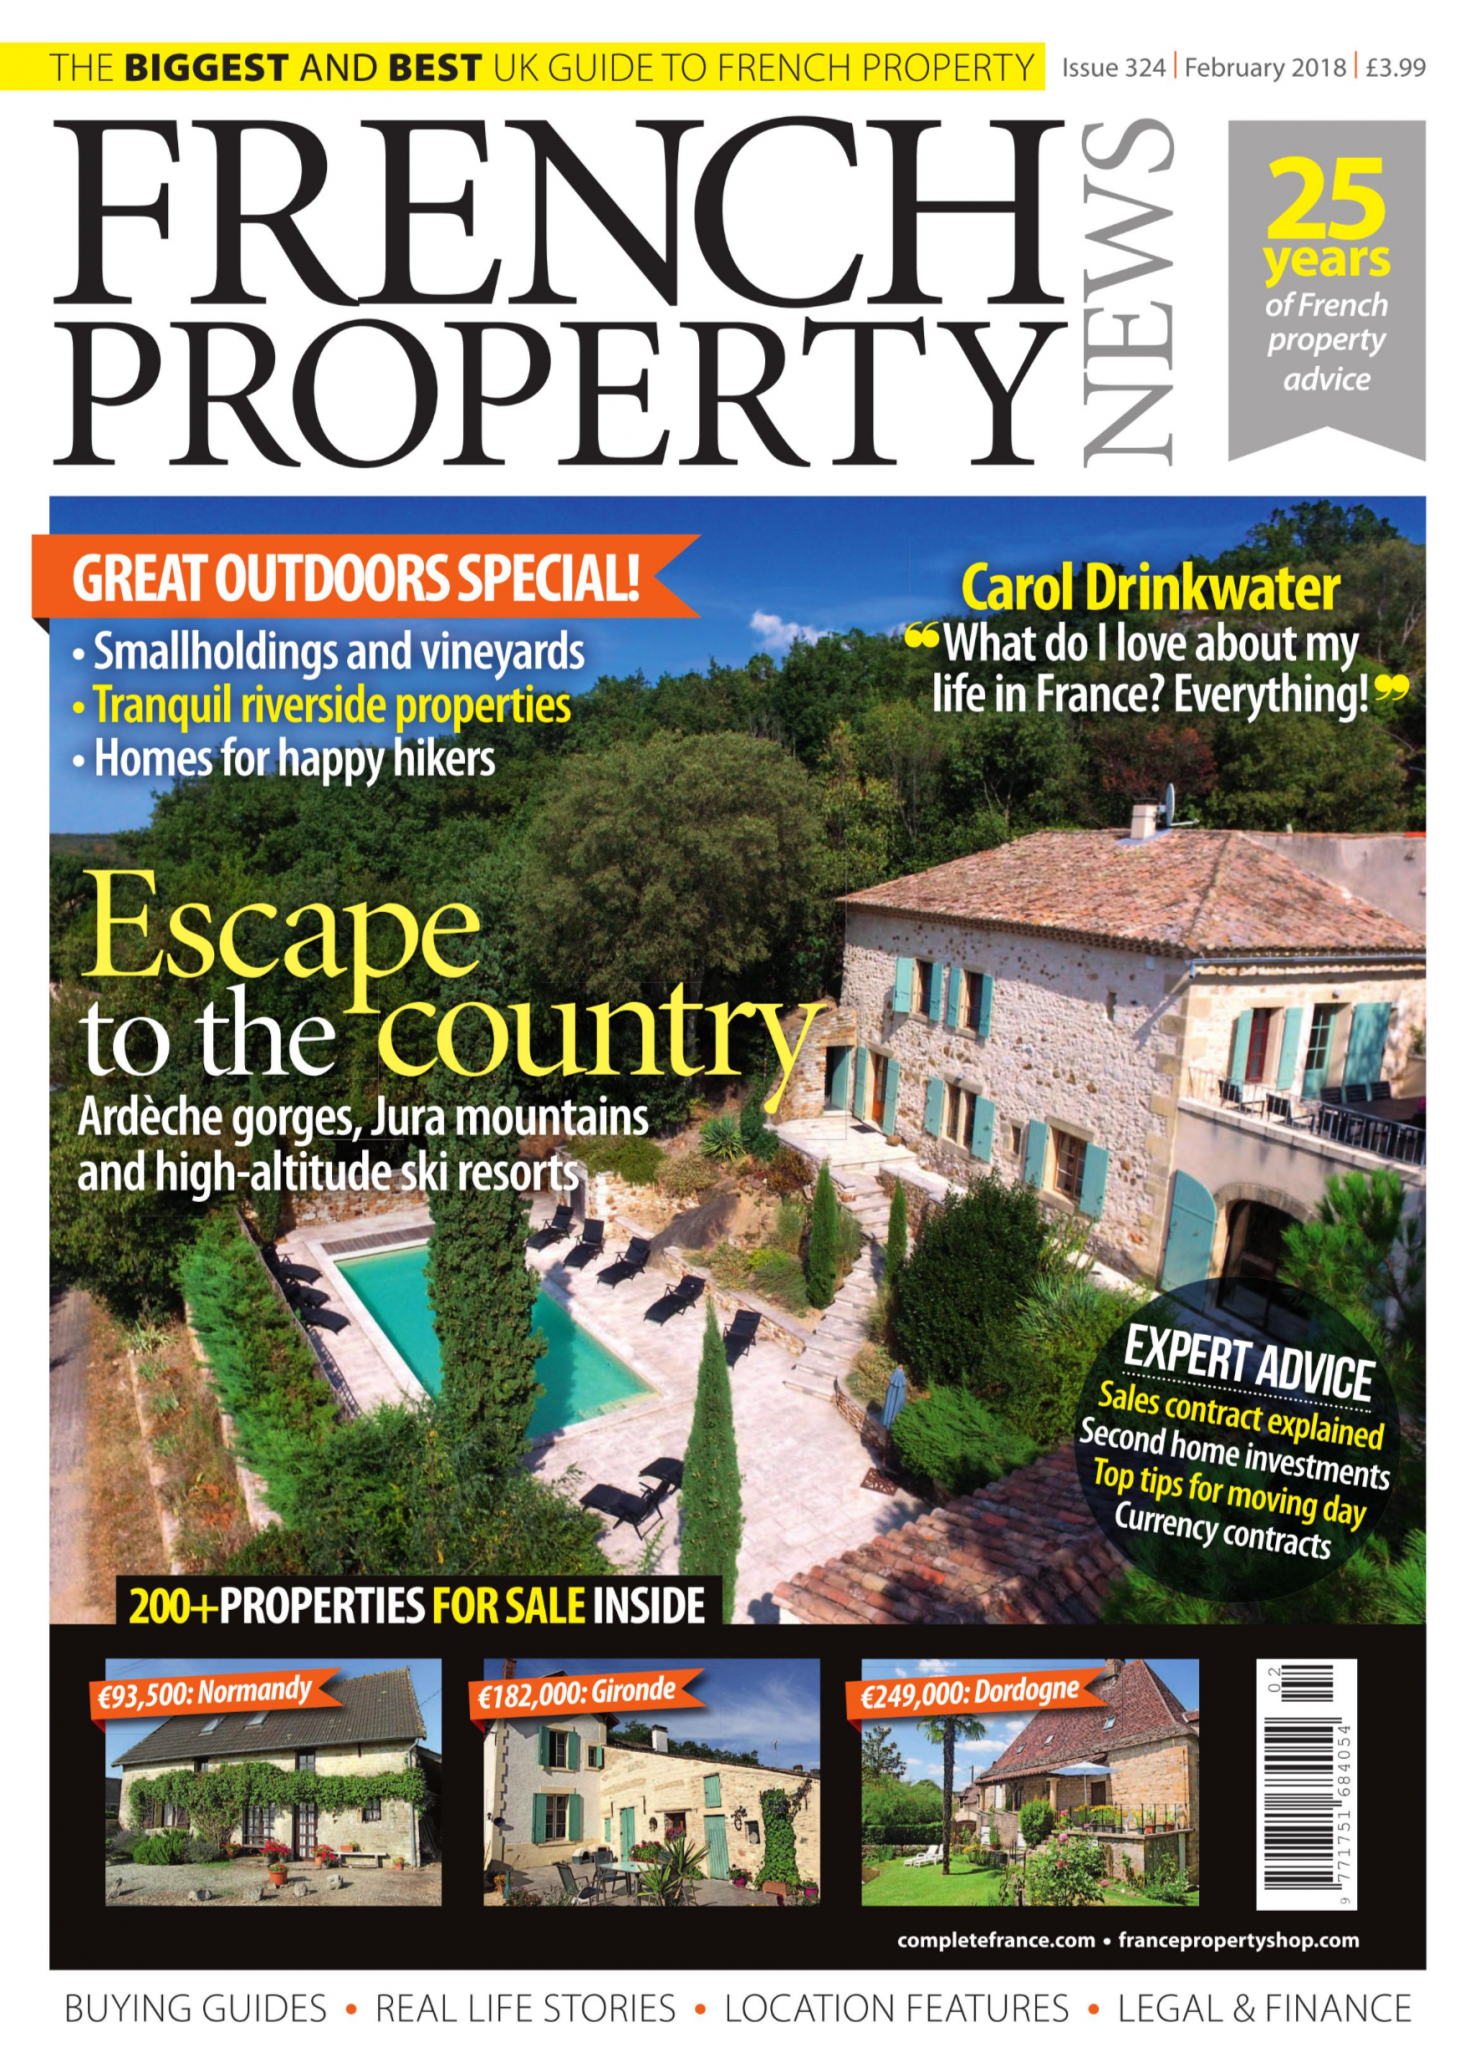 French Property News – Buying a french holiday home